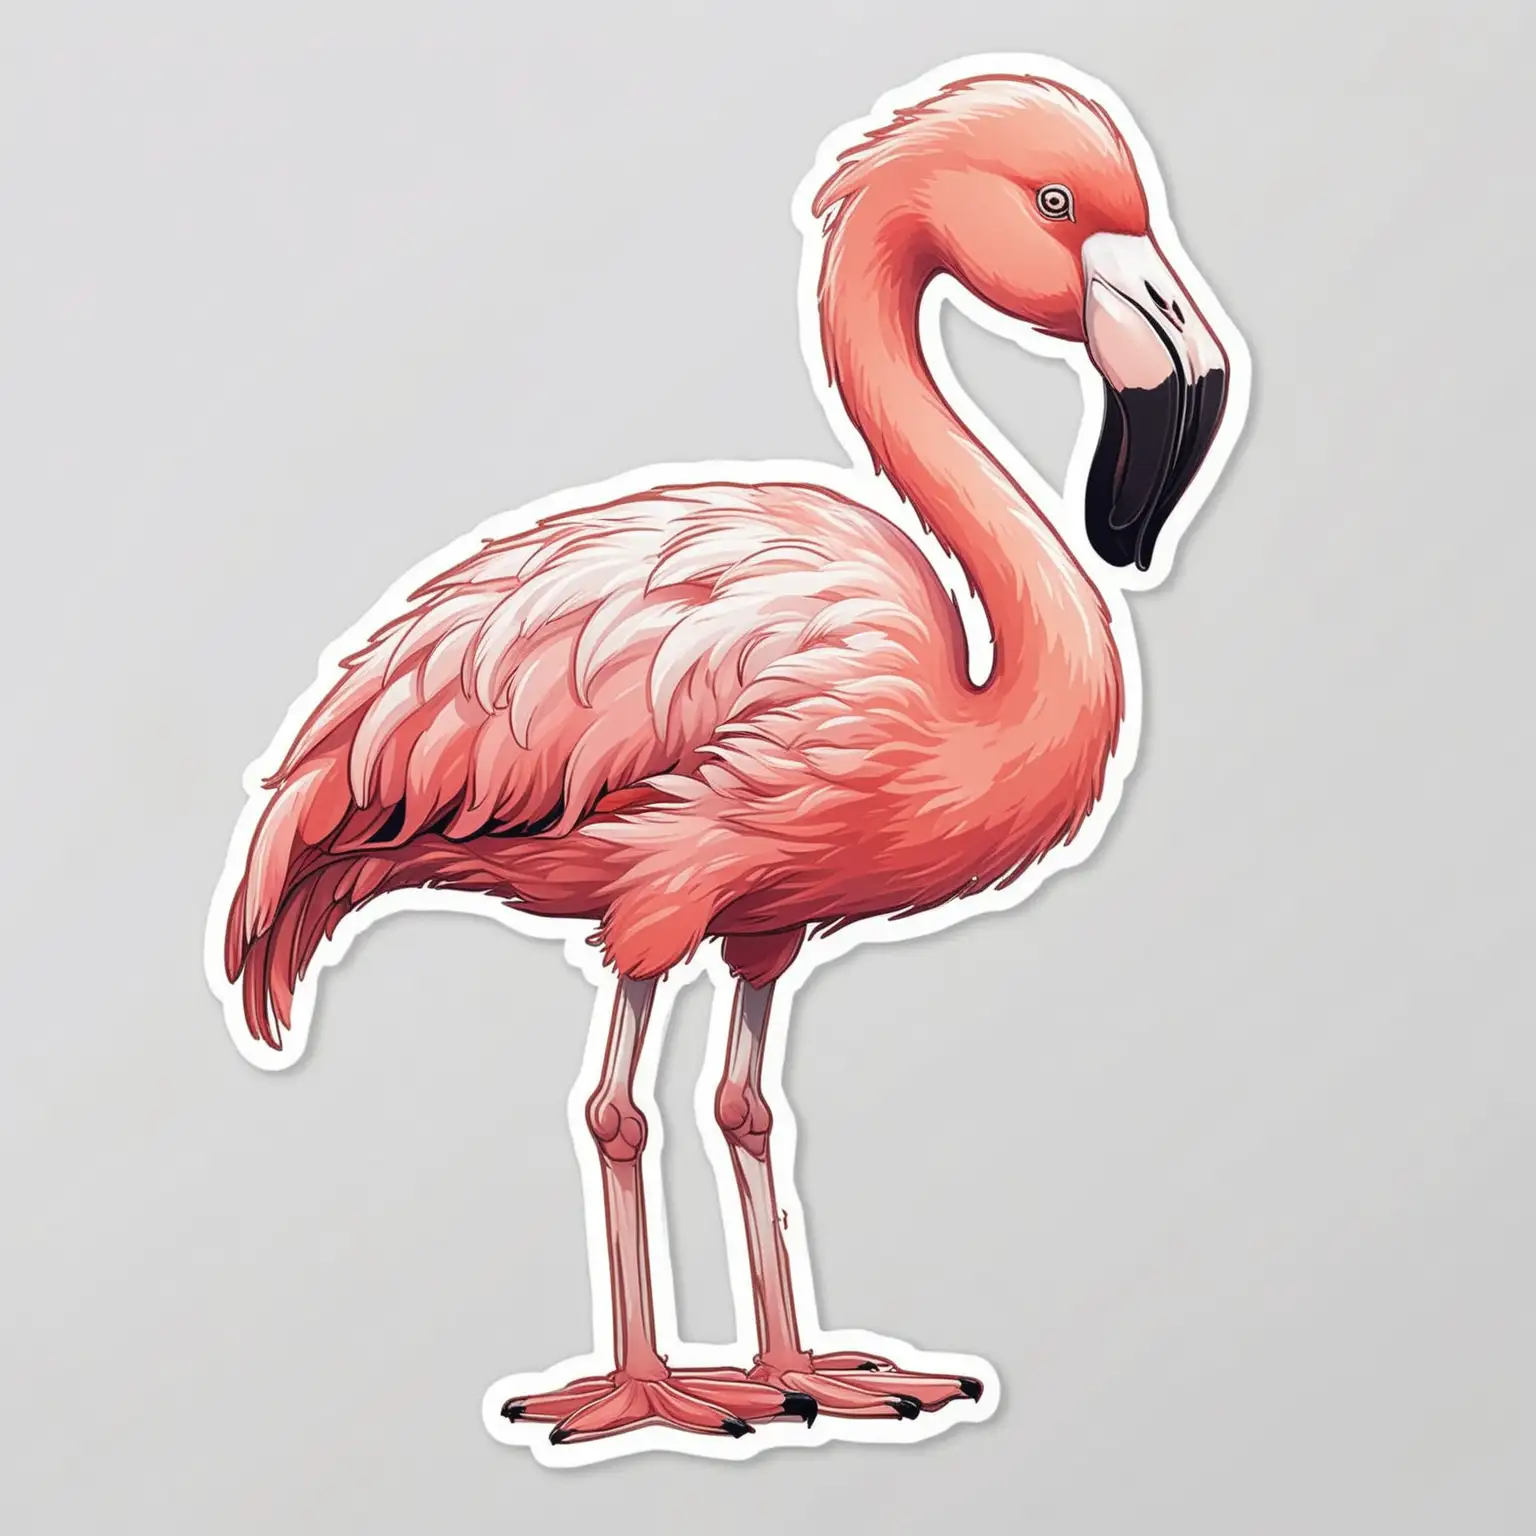 Sticker of a cute Flamingo full body, caricature style, exaggerated features, bold lines, Die-cut sticker, vector, white background